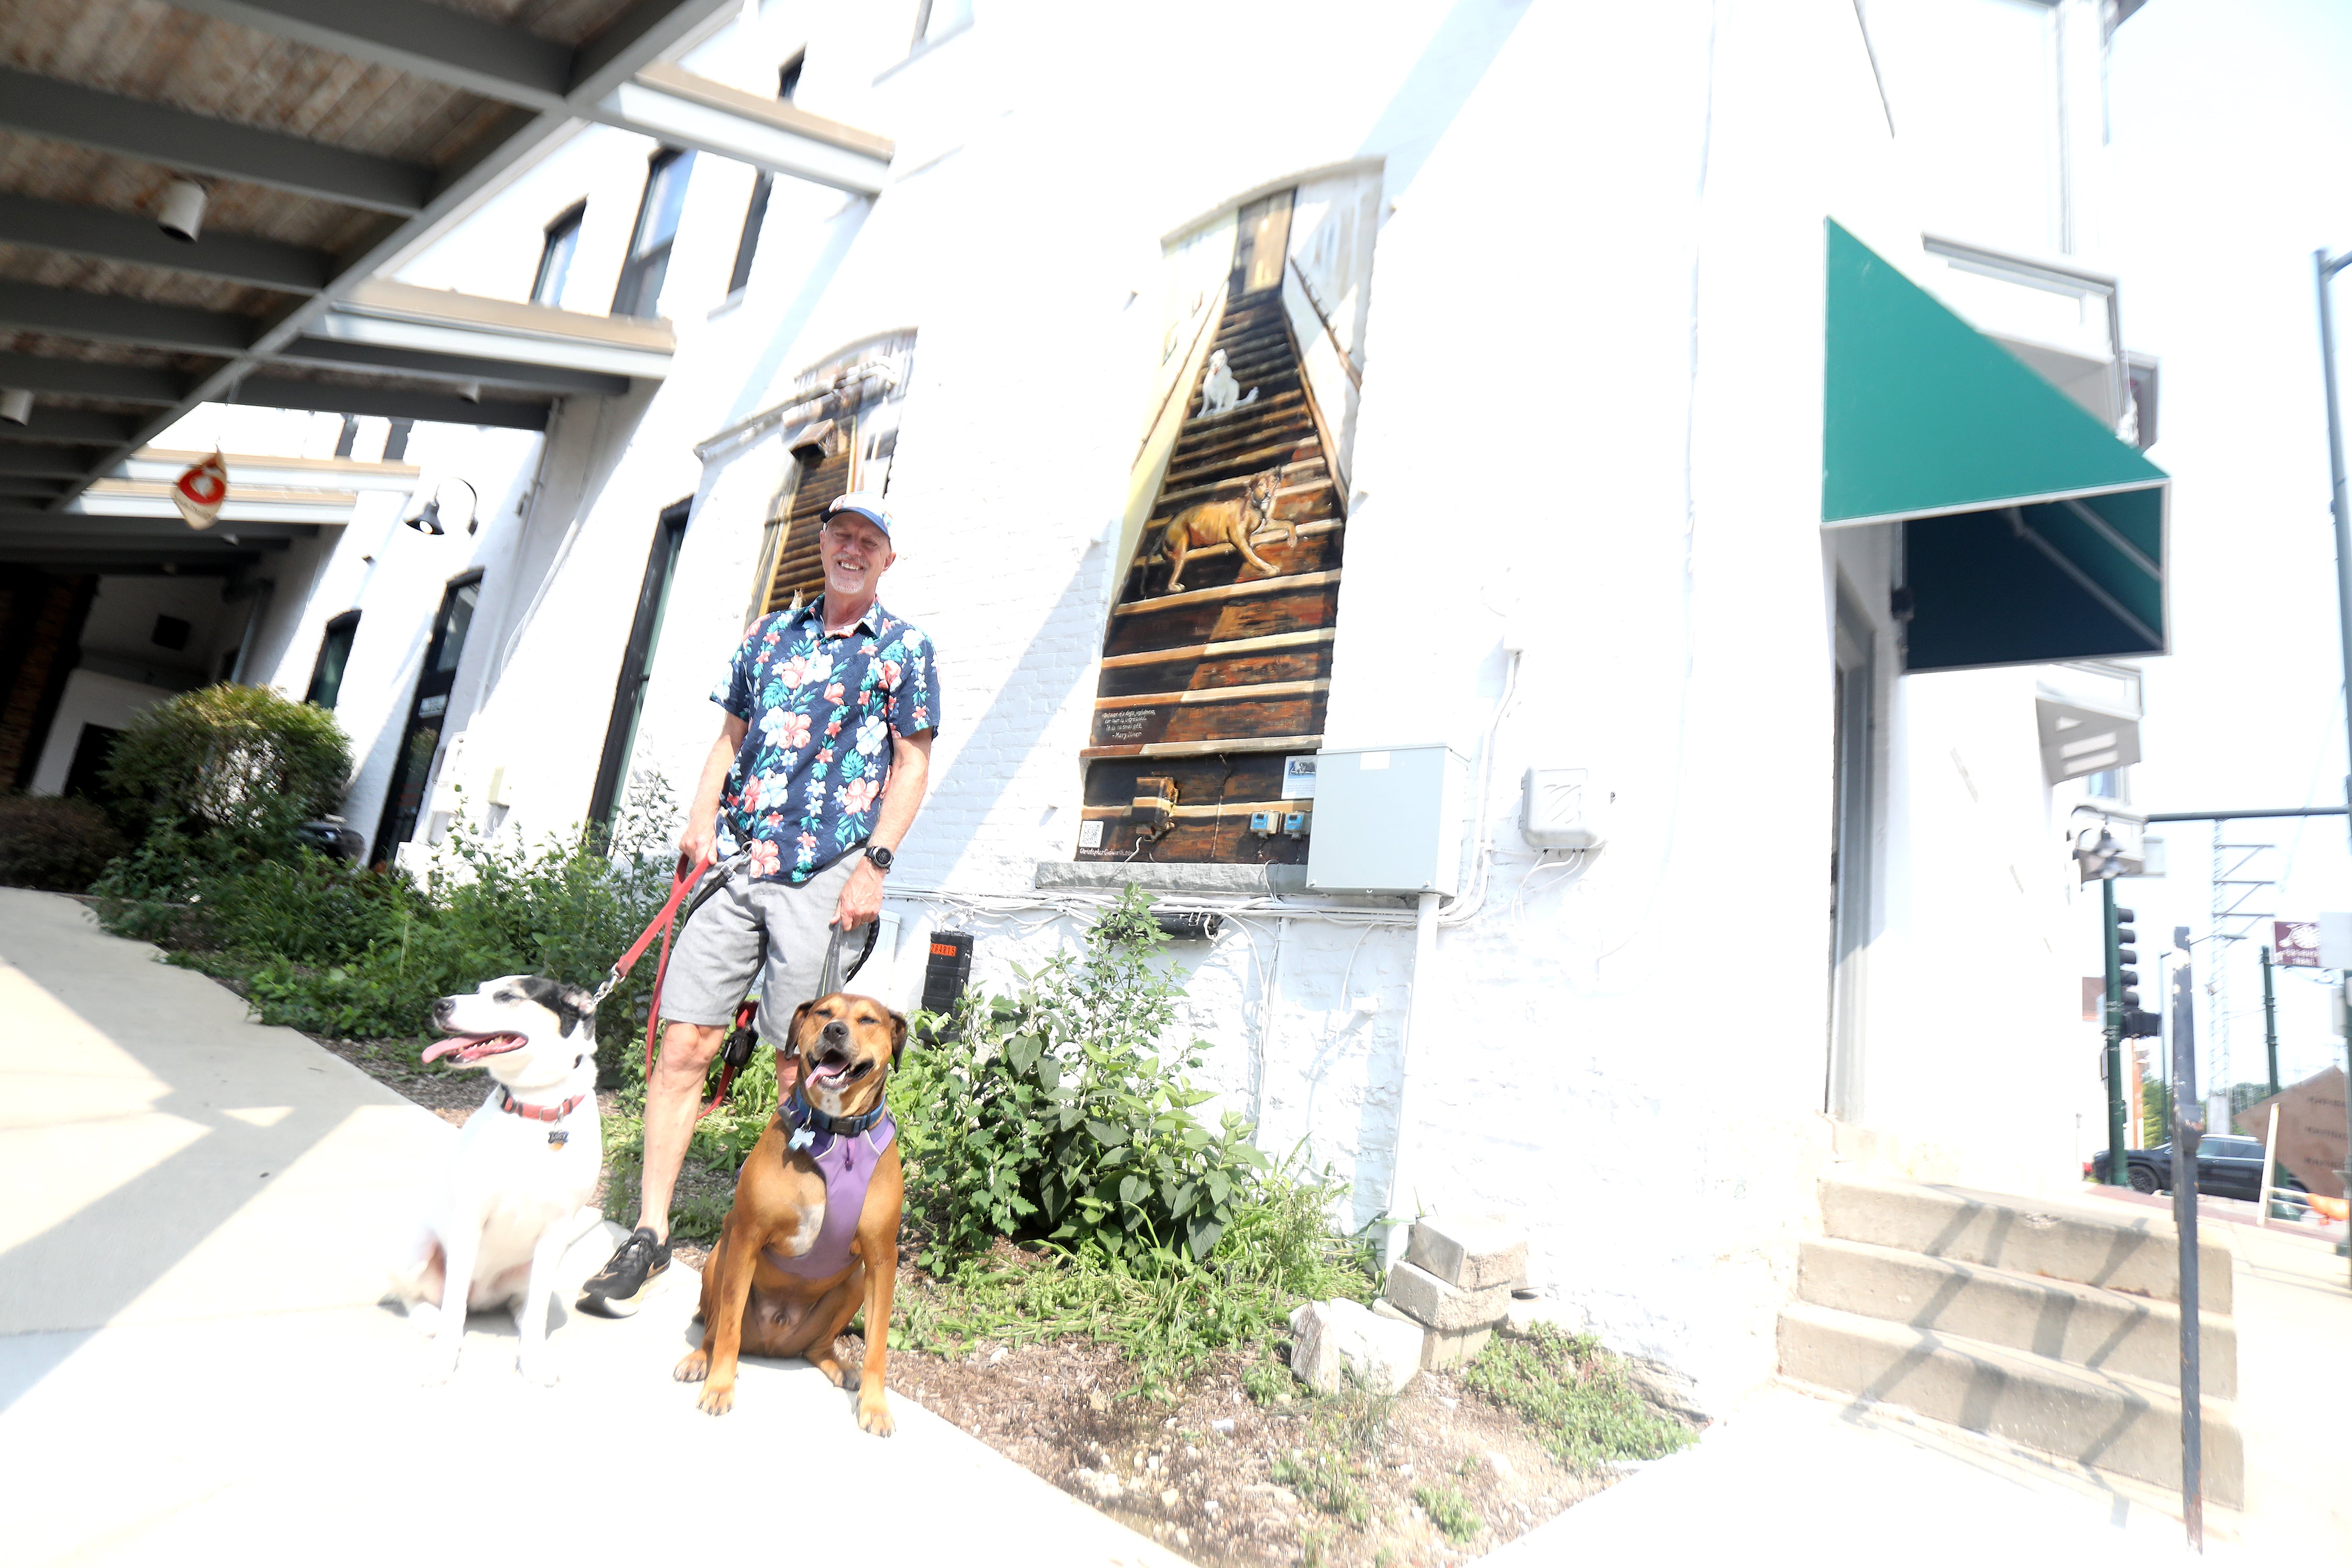 Artist Chris Cudworth used his two rescue dogs, Lucy (left) and Crash (right), as models for a mural he painted on the backside of the Fox.Build Makerspace building in downtown St. Charles.